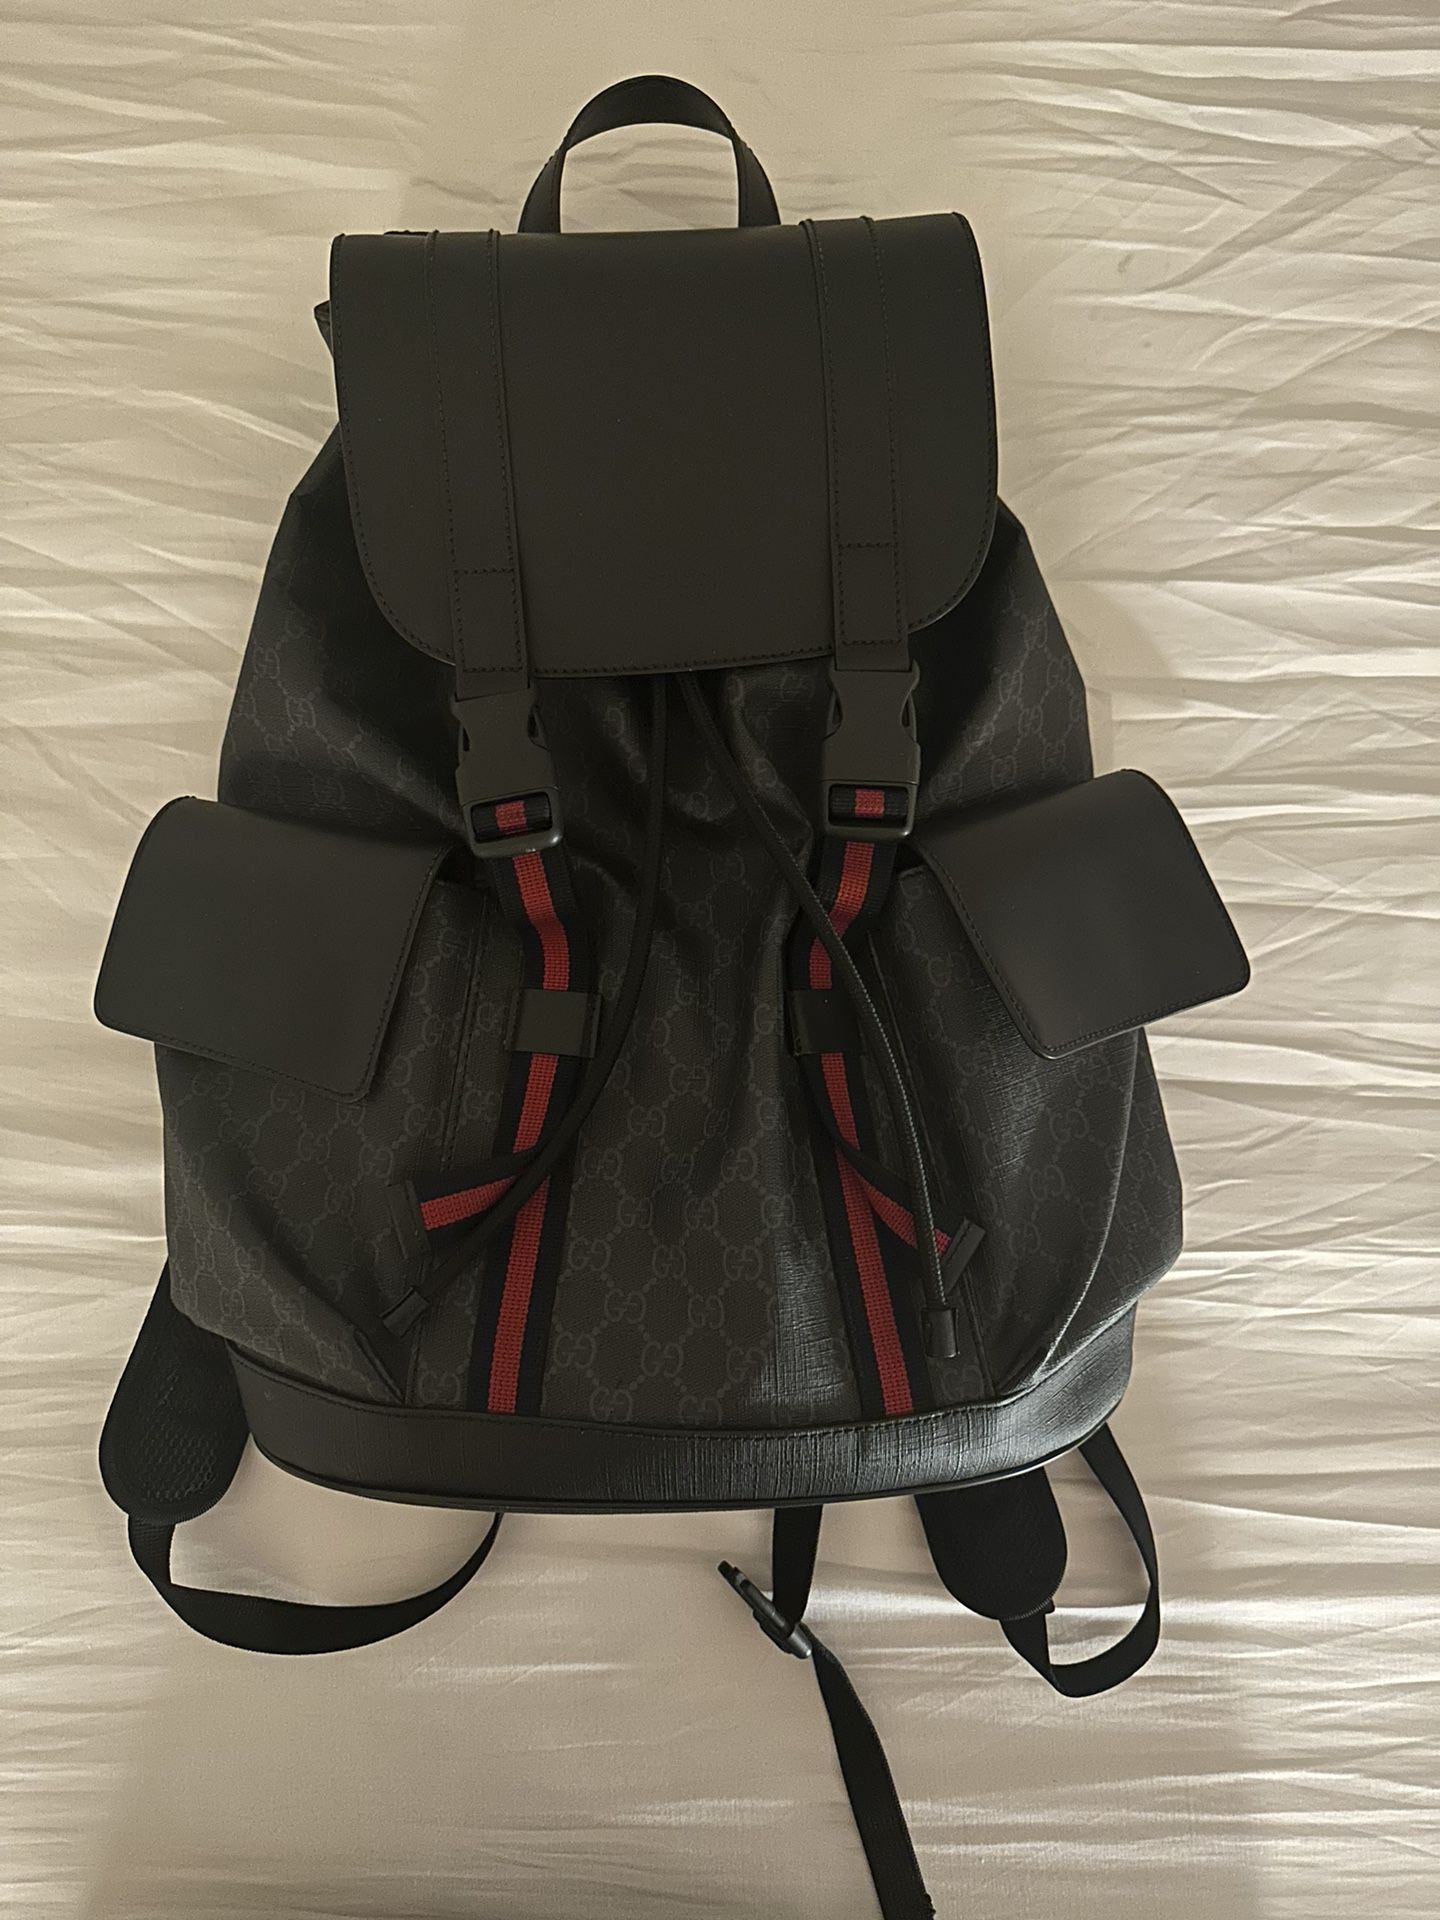 AUTHENTIC GUCCI BACKPACK for Sale in Irvine, CA - OfferUp